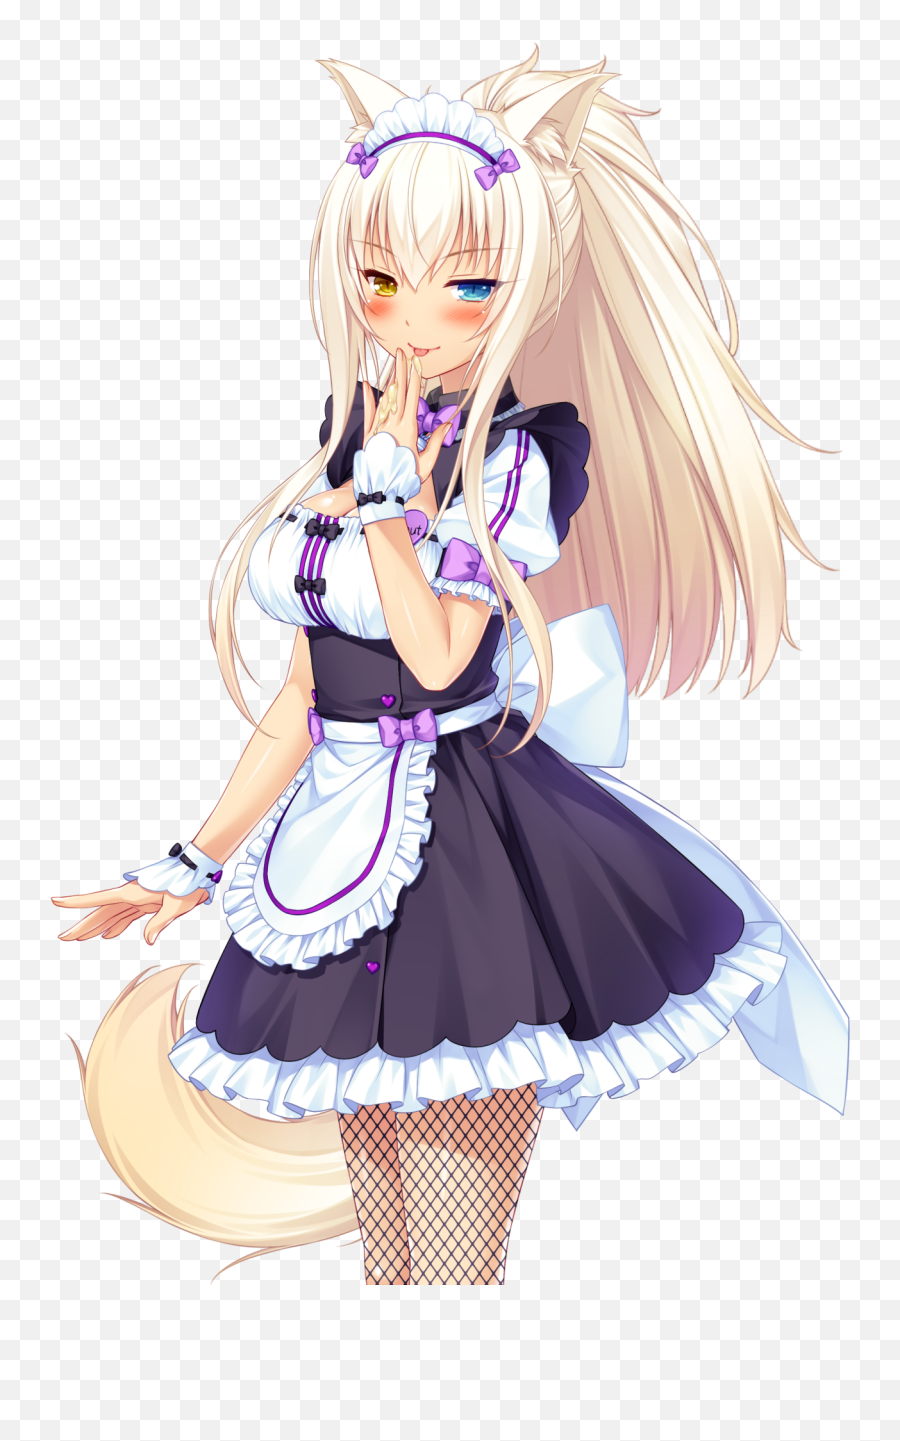 Coconut Was The One Who Tasted - Nekopara Coconut png - free